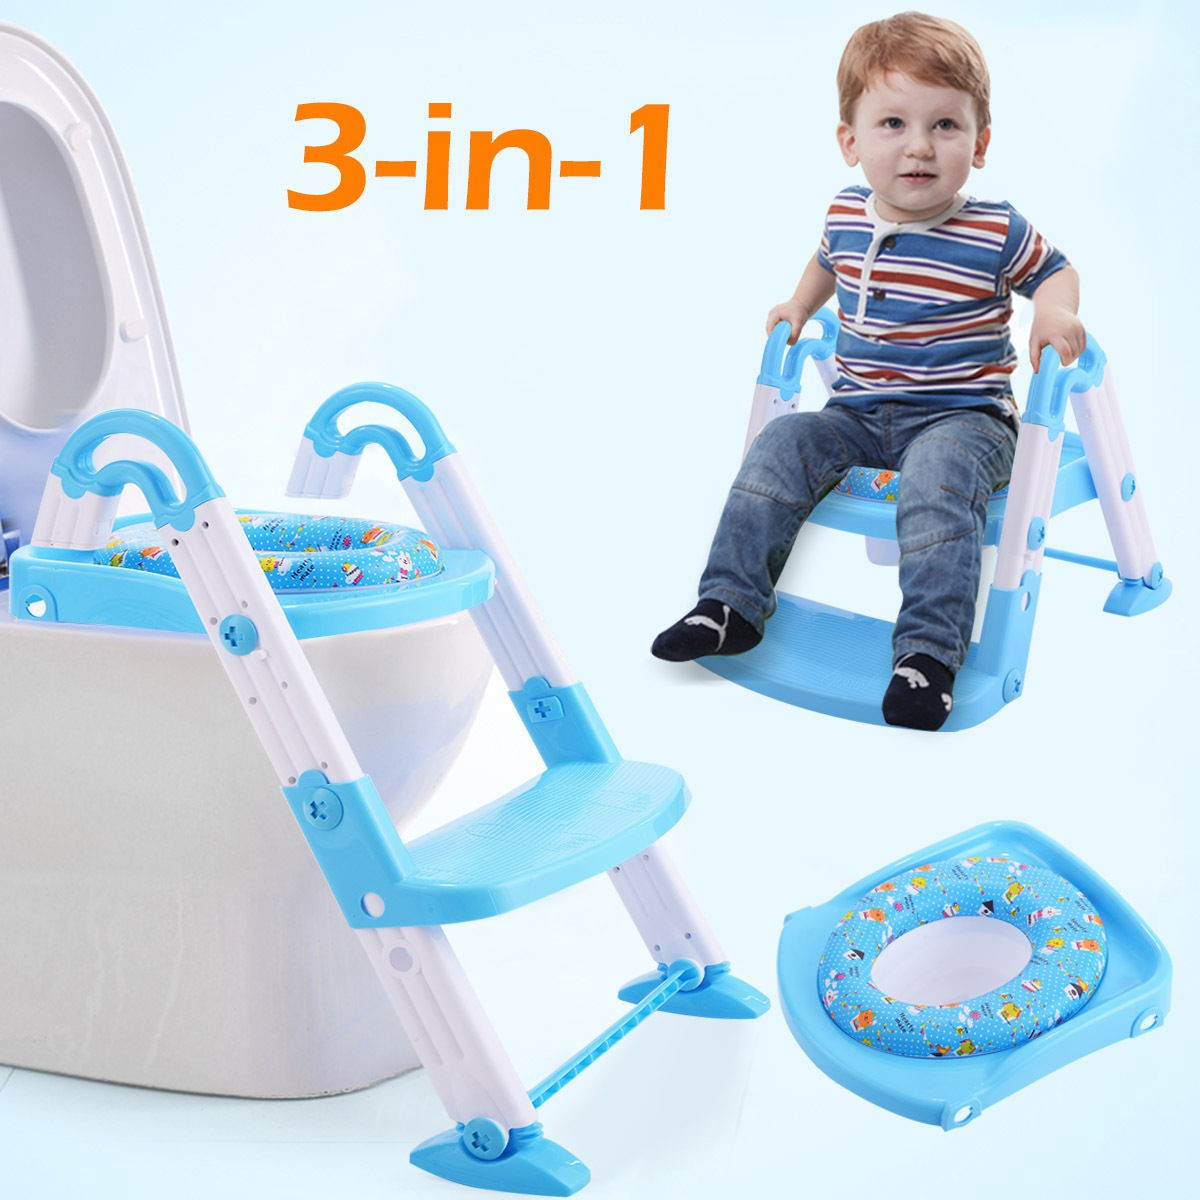 Kids Potty Chair
 3 in 1 Fold Baby Potty Training Toilet Chair Seat Step